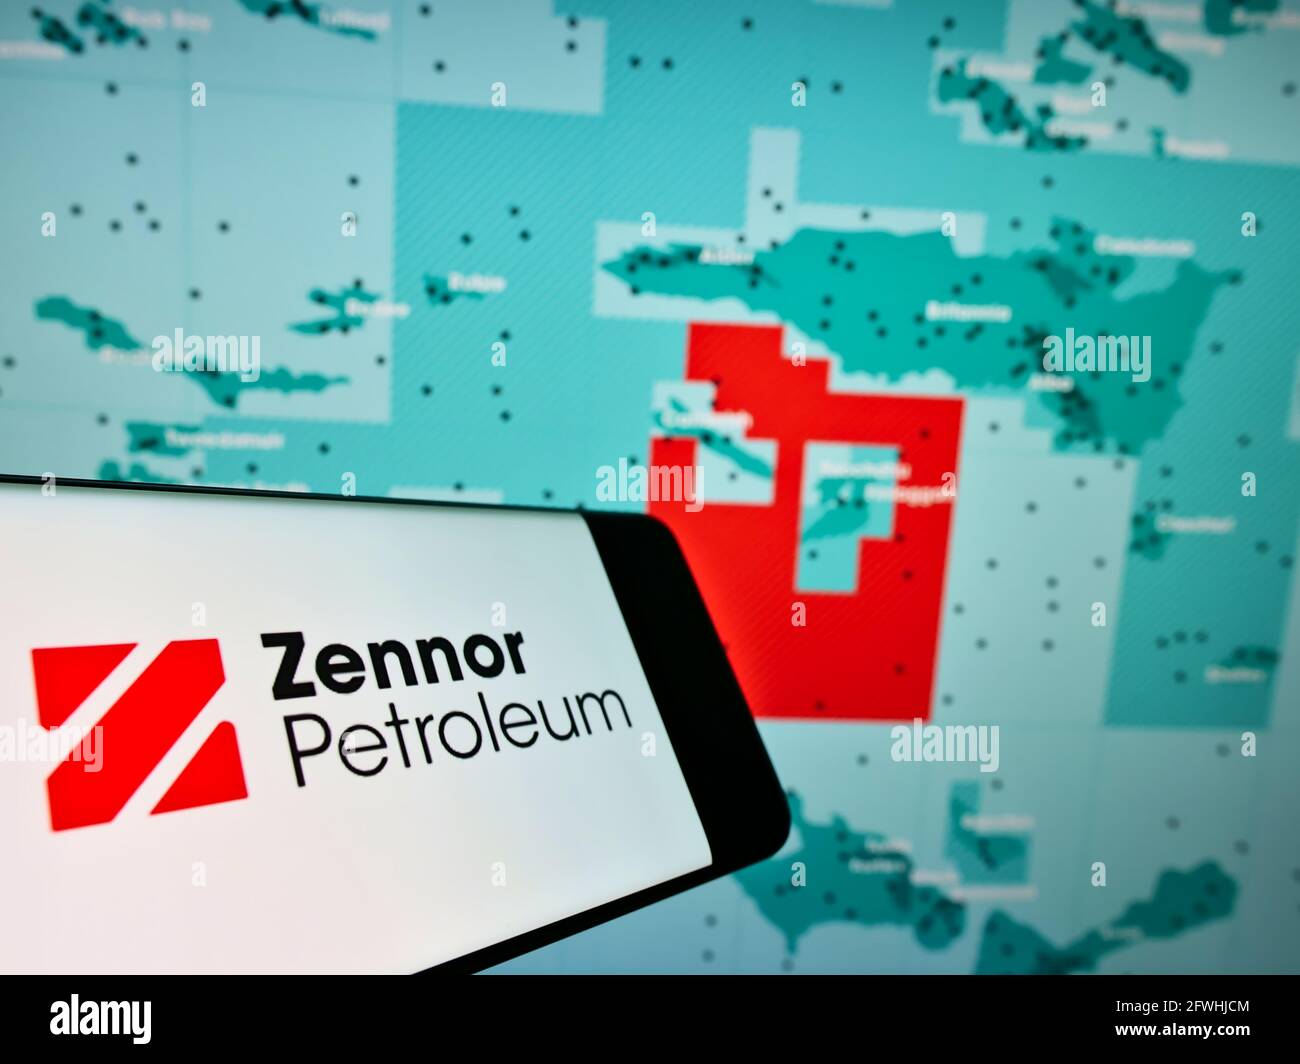 Mobile phone with logo of British oil and gas company Zennor Petroleum Ltd. on screen in front of website. Focus on center-right of phone display. Stock Photo